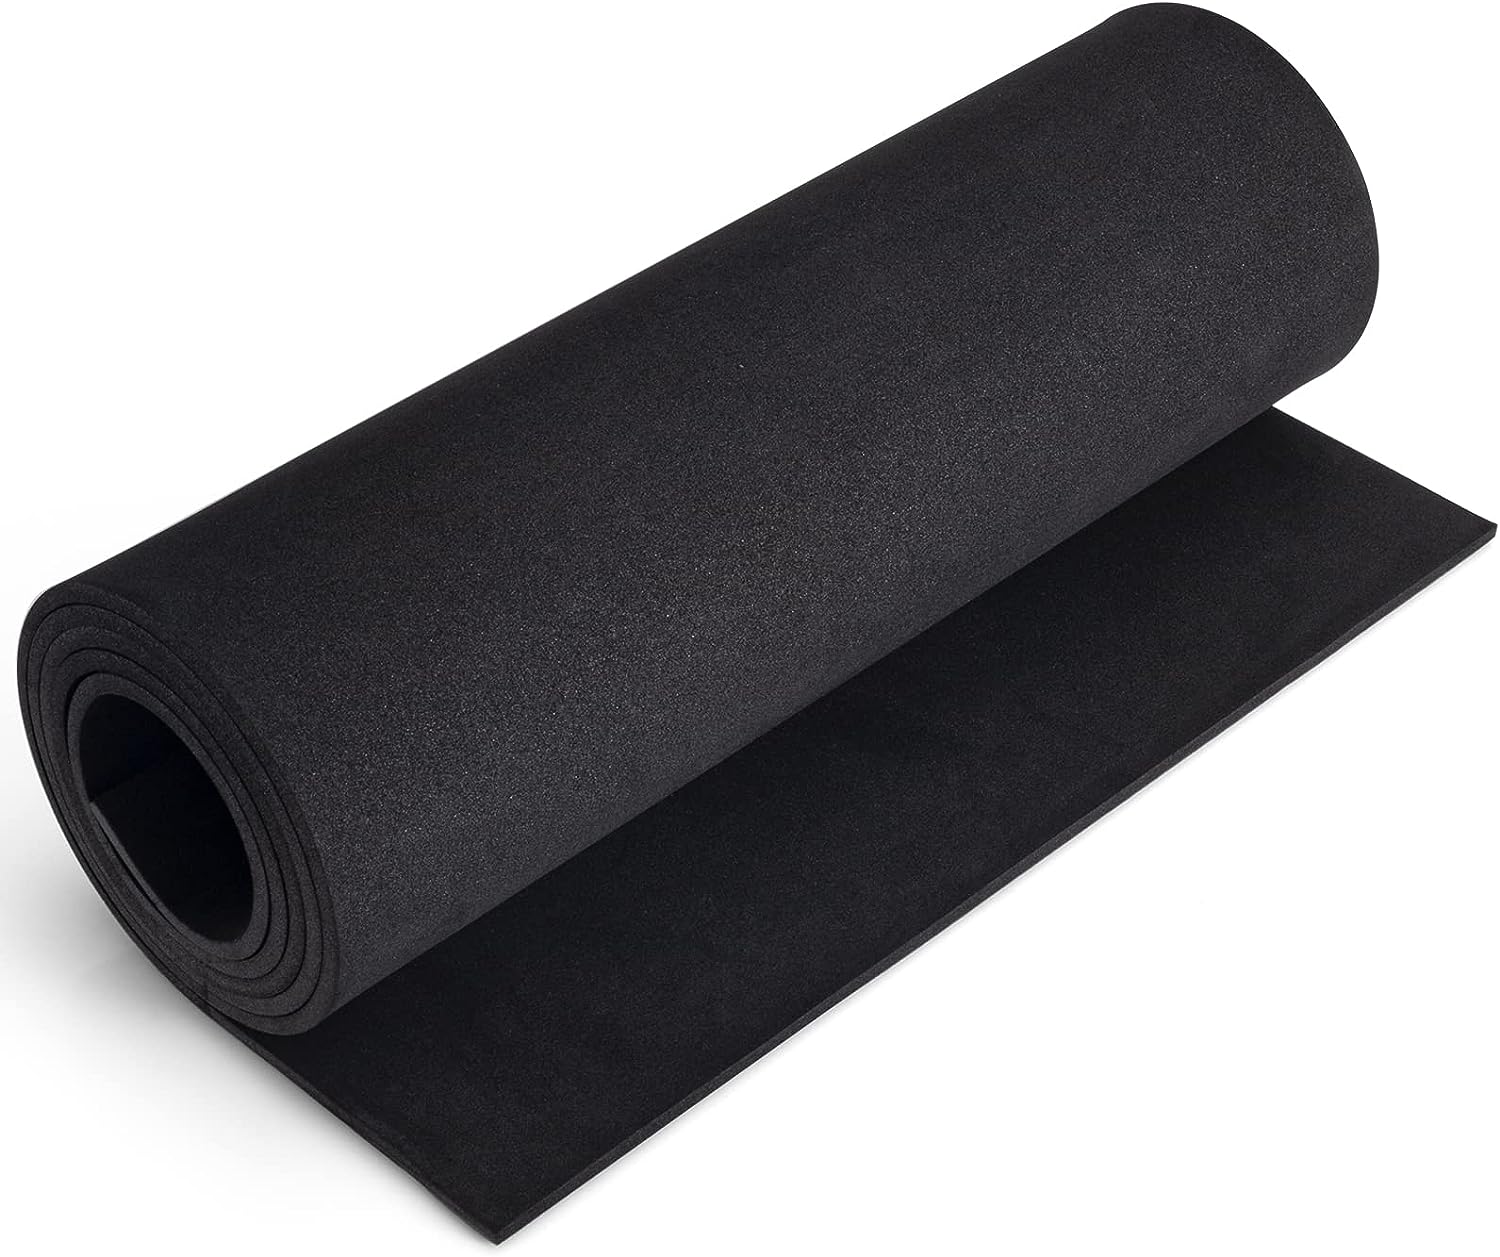 Black Foam Sheets Roll, Premium Cosplay Large EVA Foam Sheet 13.9" x 59",5mm Thick, Density 86kg/m3for Cosplay Costume, Crafts, DIY Projects by PAIDU